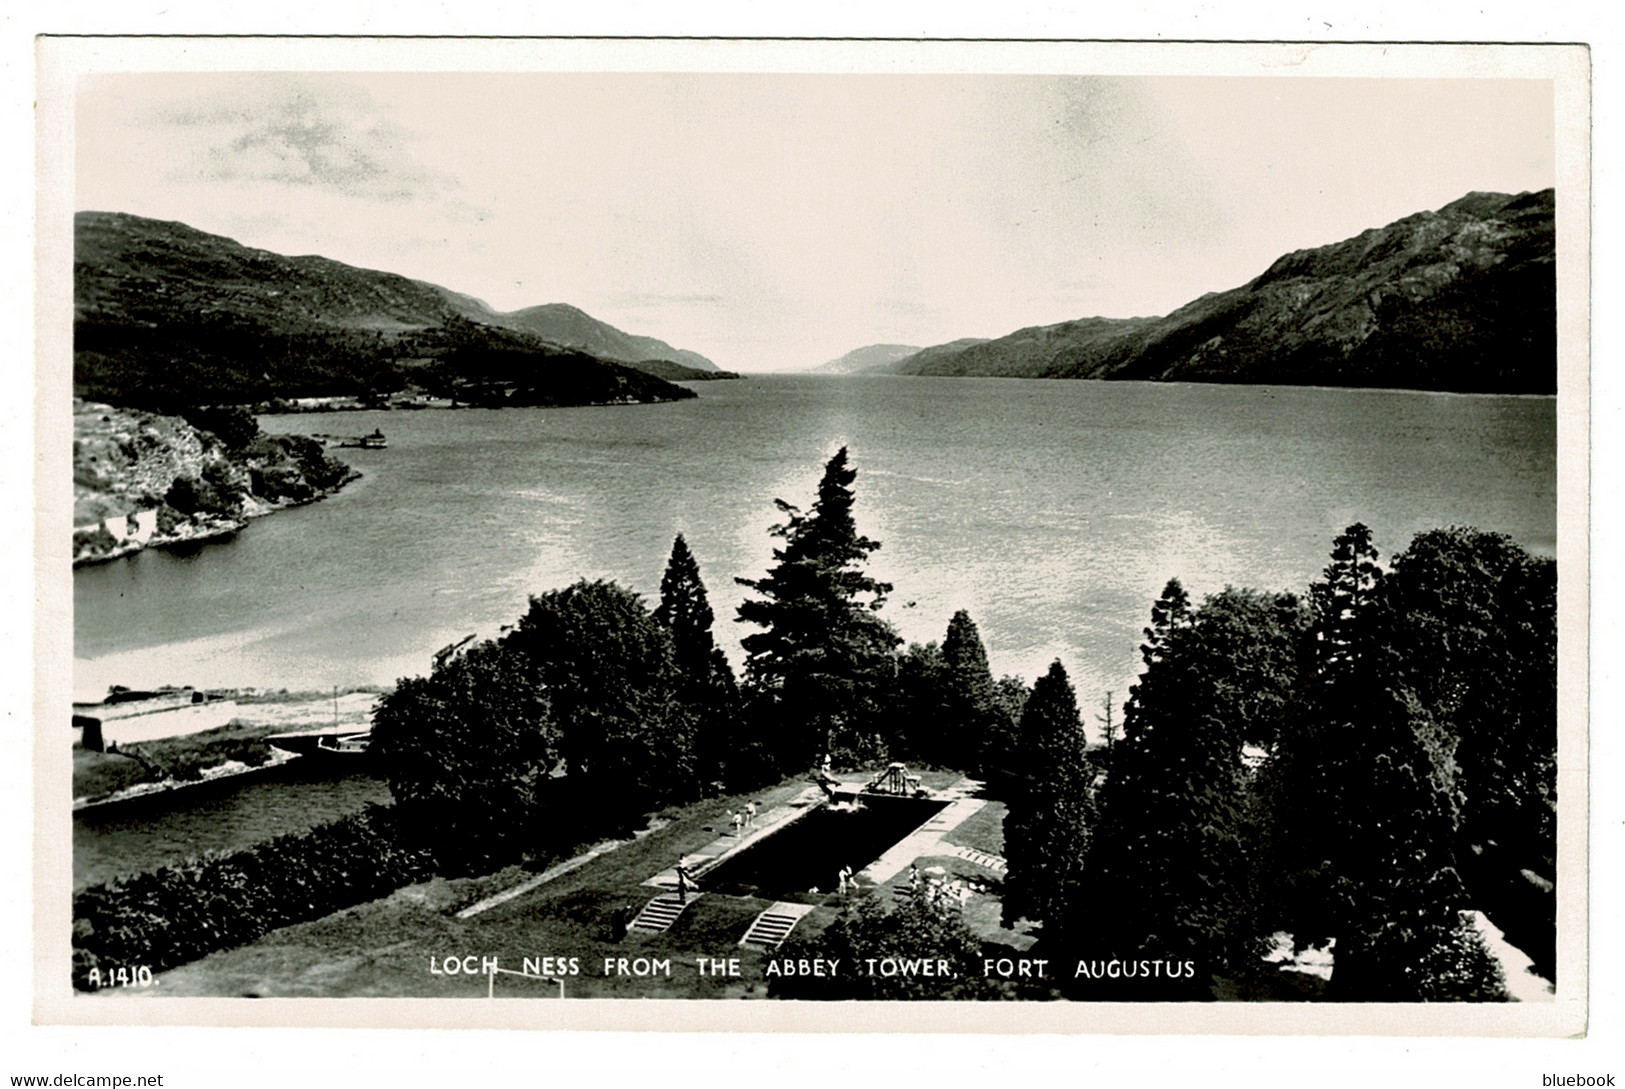 Ref 1424 - Real Photo Postcard - Loch Ness From The Abbey Tower - Fort Augustus Scotland - Inverness-shire